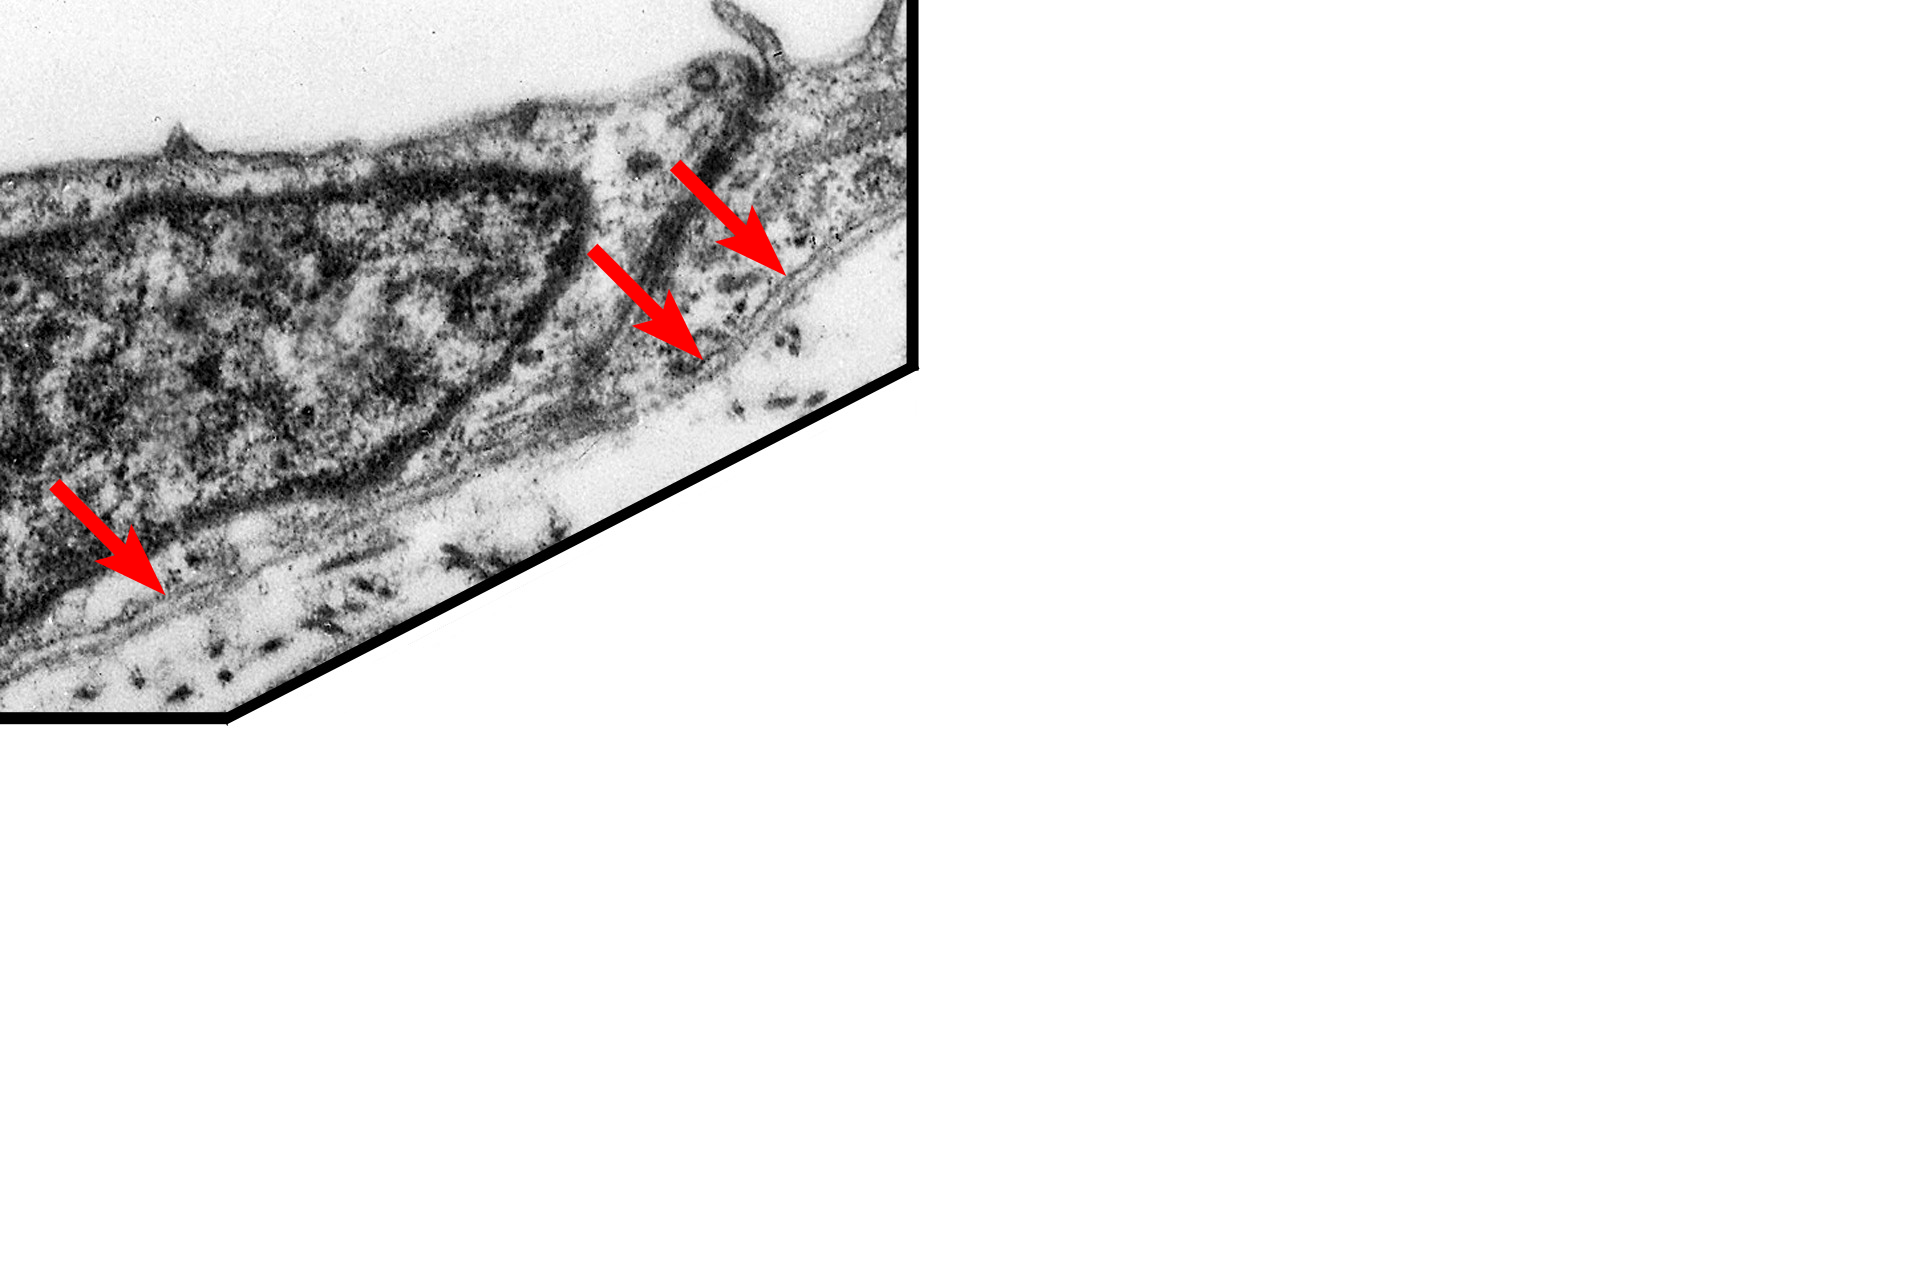 Plasma membrane <p>All epithelia rest on a basement membrane, which consists of two components, the basal lamina, secreted by epithelial cells, and a reticular lamina, secreted by fibroblasts in the underlying connective tissue.  The basal lamina is, in turn, subdivided into lamina lucida and lamina densa.  Serosa  15,000x</p>
